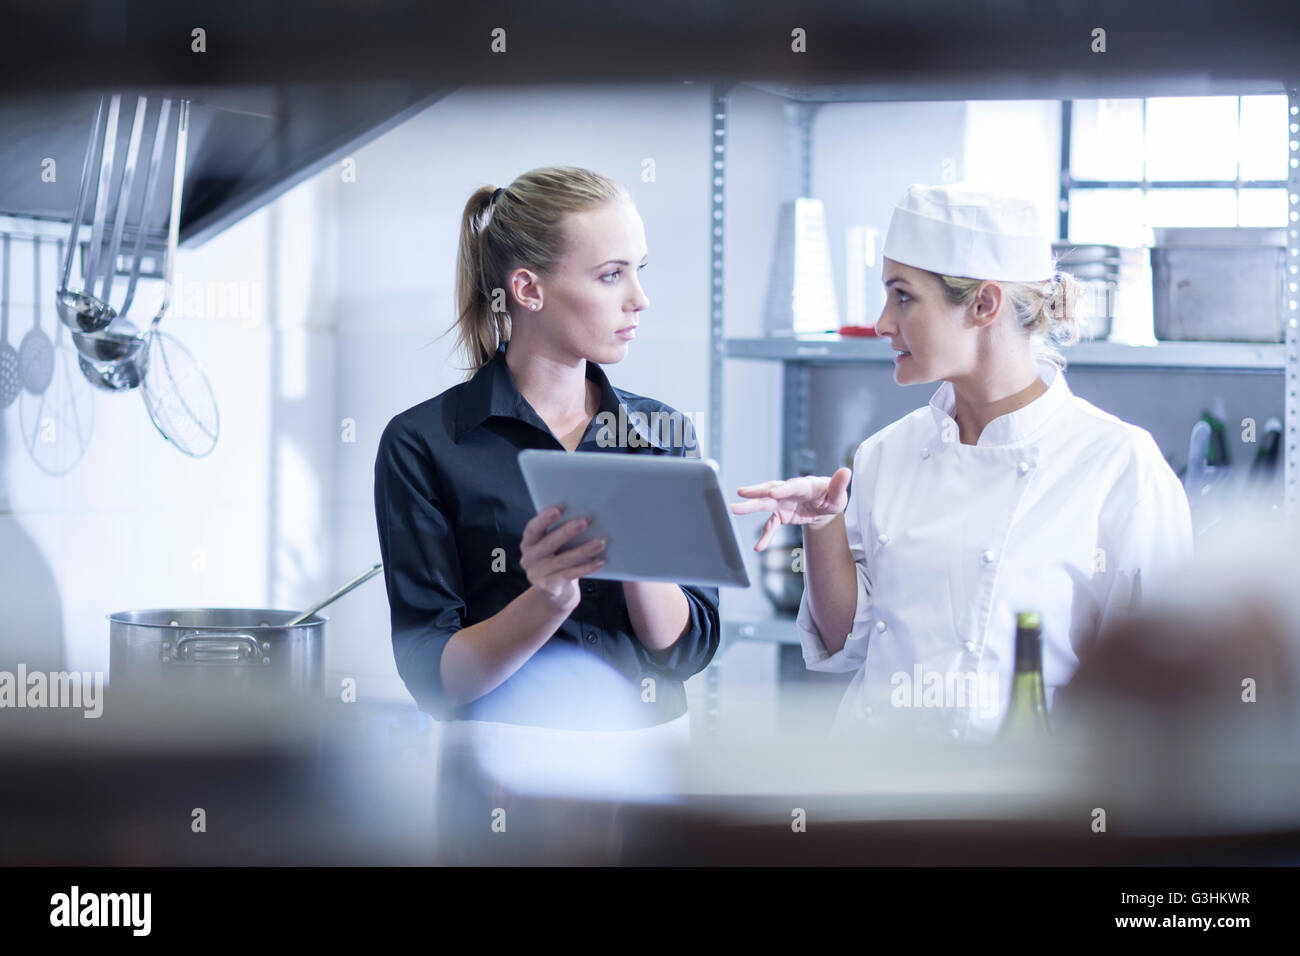 Waitress and chef discussing orders on digital tablet in kitchen Stock Photo